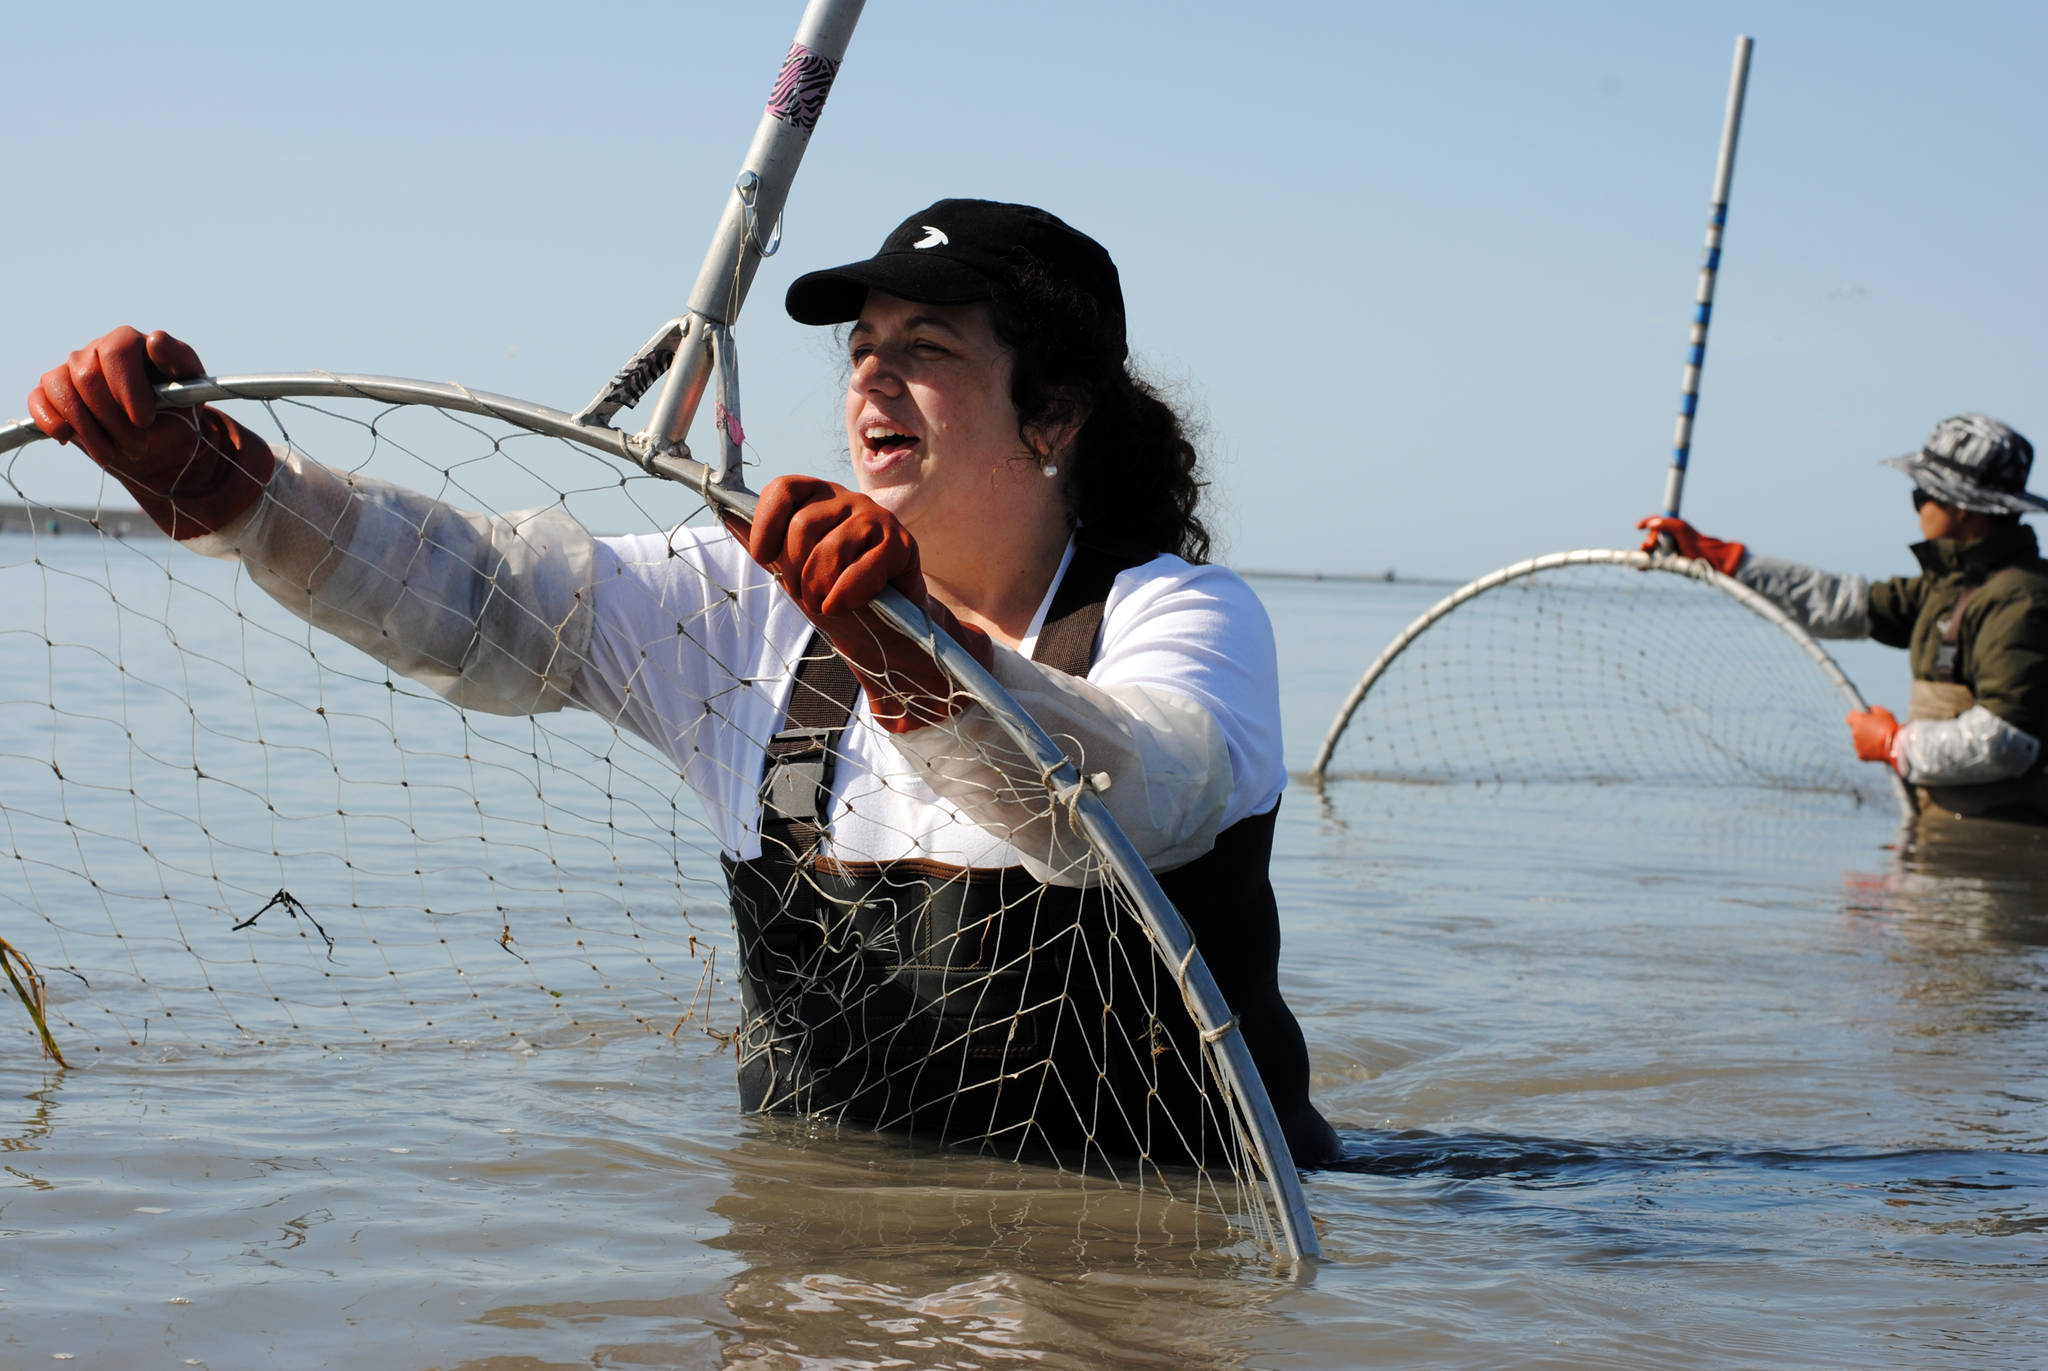 Annie Cromwell of Anchorage dipnets for sockeye salmon Sunday, July 23, on the north beach in Kenai, Alaska. (Photo by Kat Sorensen/Peninsula Clarion)